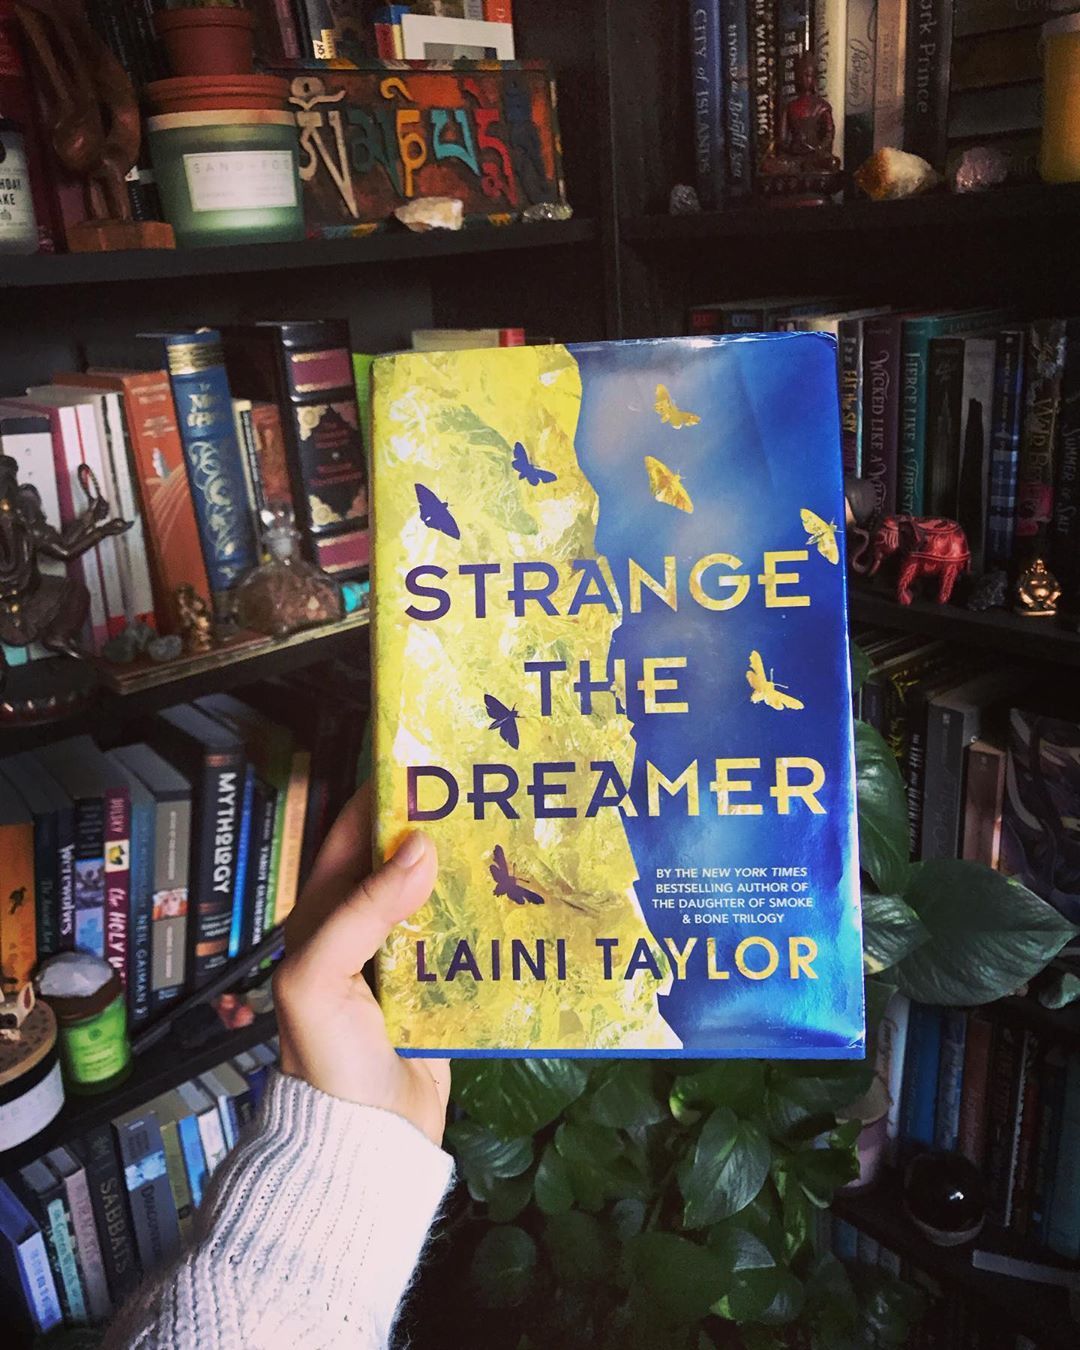 I think about Lazlo Strange so often, it hurts my heart a little. Is there a character that youâre just never going to let go of? . #maryreads #amreading #reading #readersofinstagram #books #booklover #bookish #bookreview #bookstagram...